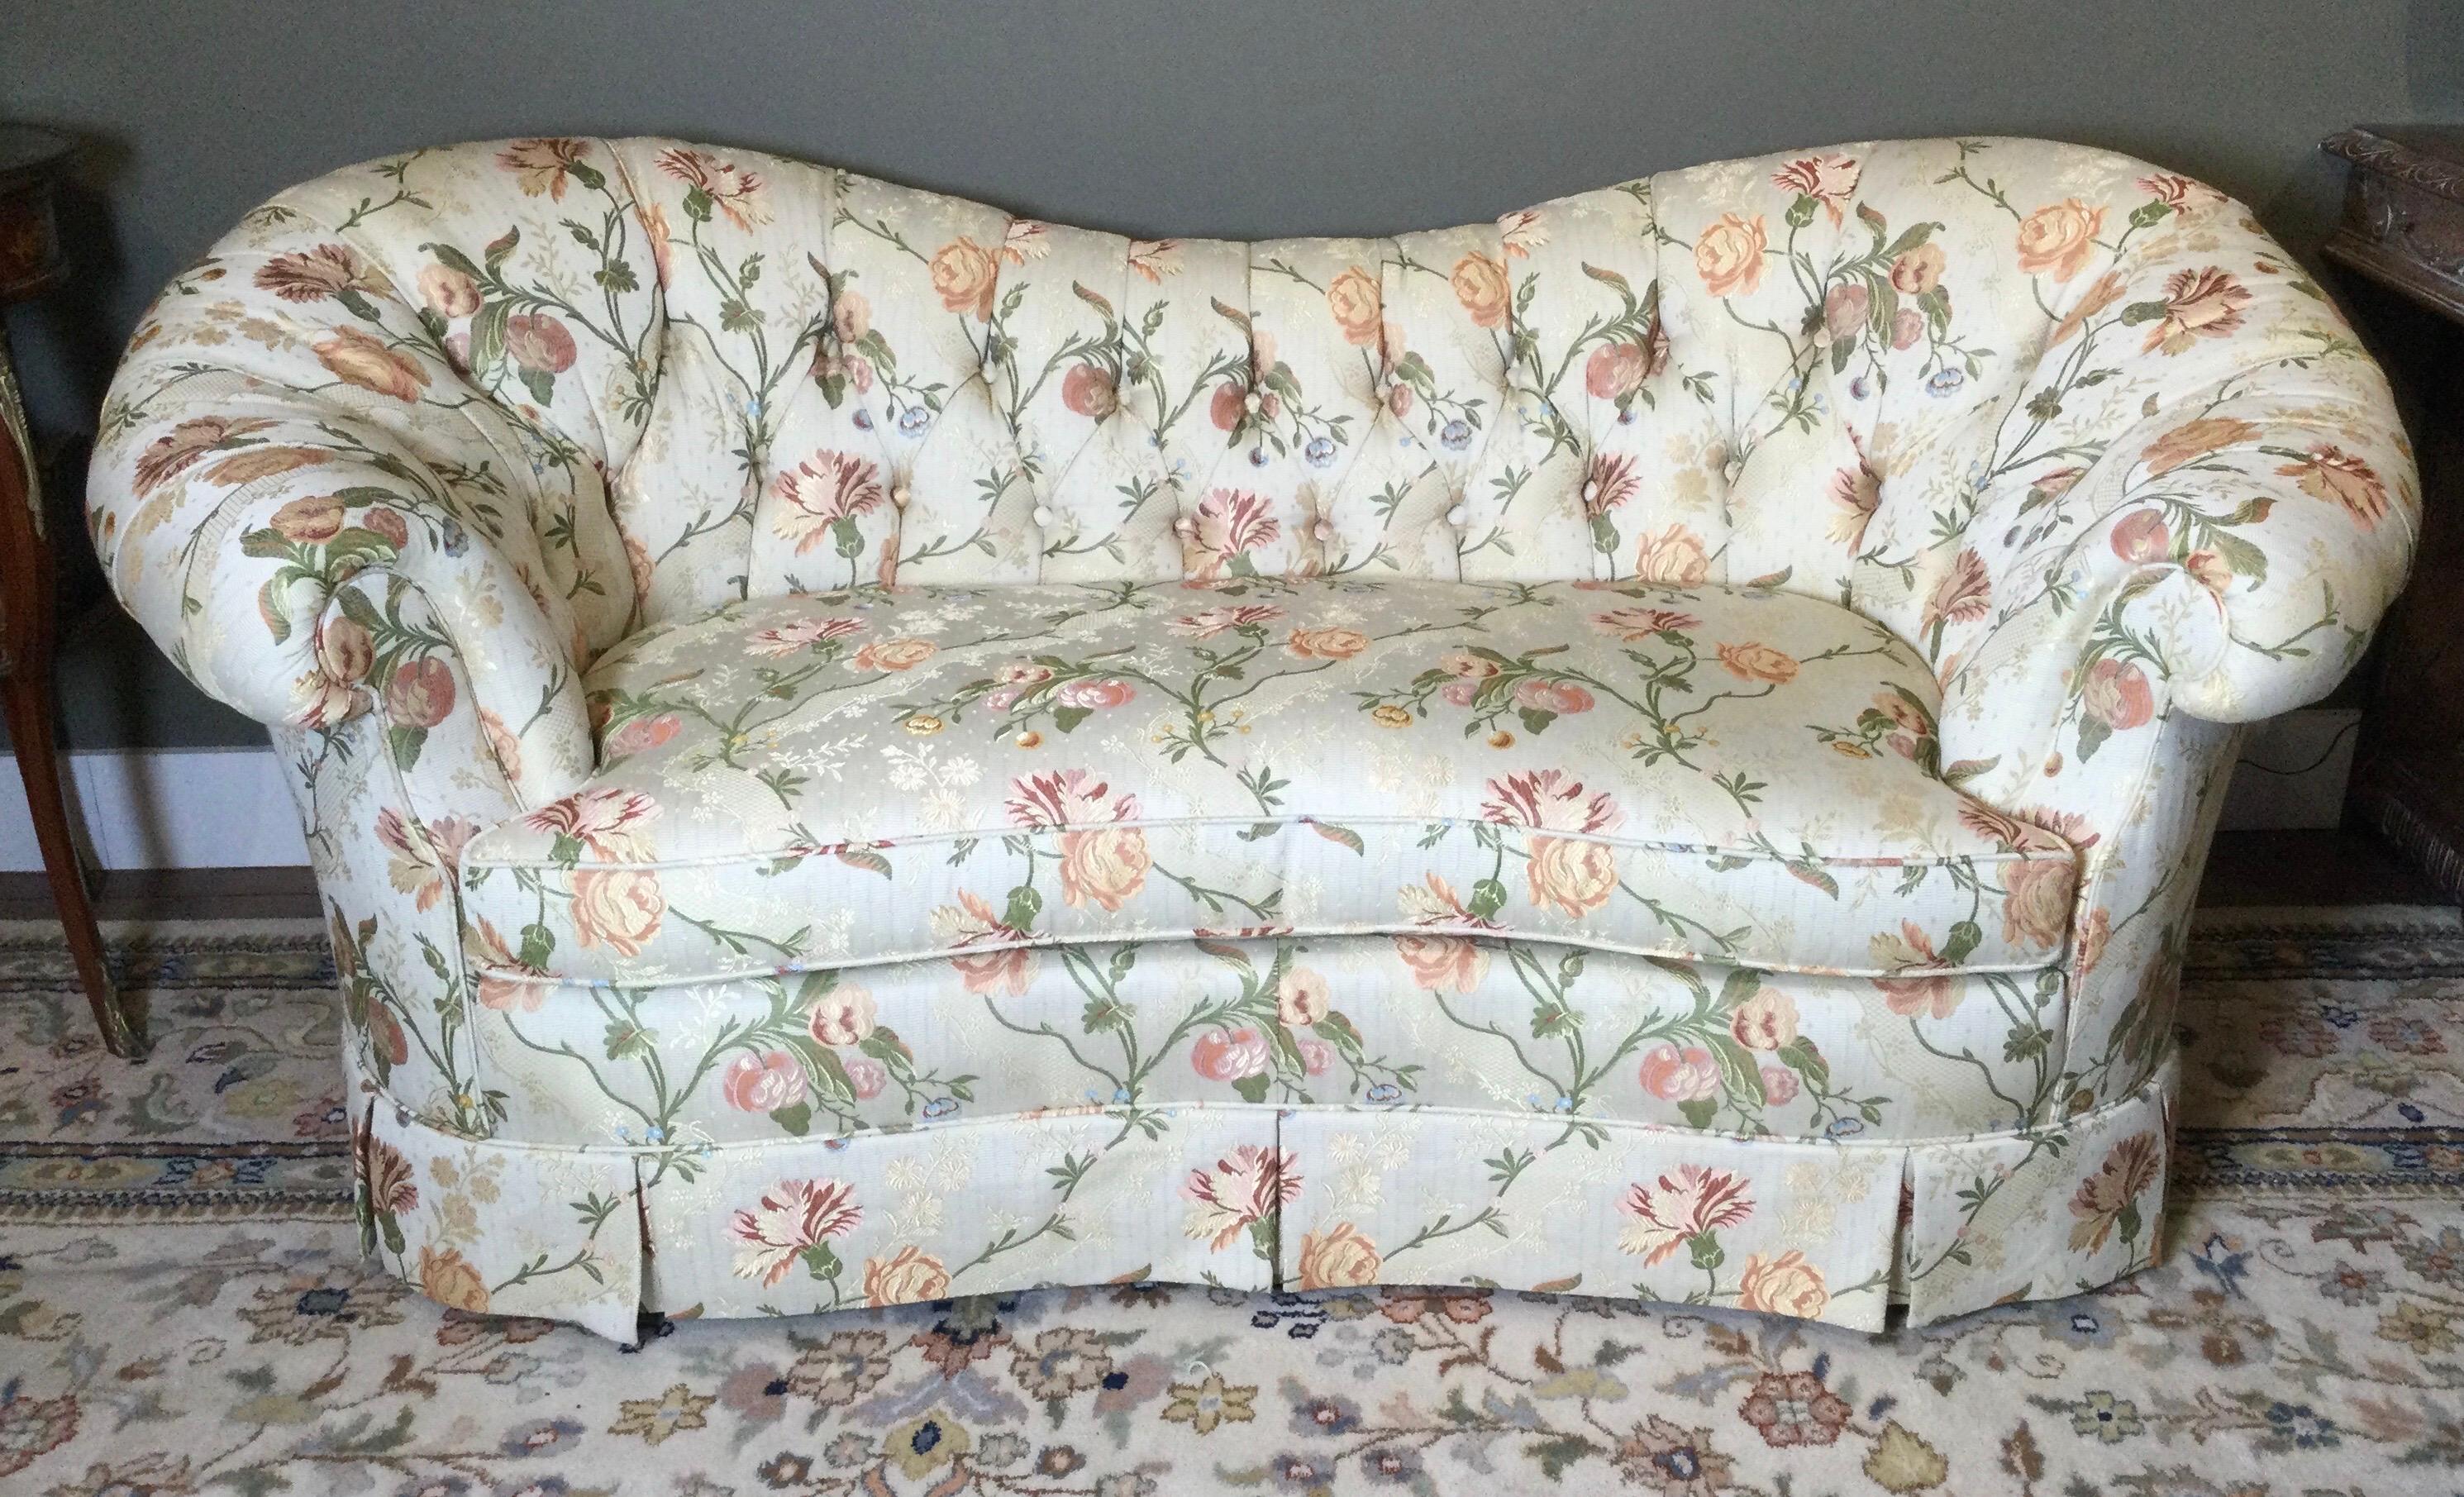 Elegant and formal shapely Baker 70 inch sofa with curved frame with large rolled arms. The fabric is a magnificent woven floral of the highest quality. The kiln dried hardwood frame with 8 way hand ties hourglass coils for the seat which it the